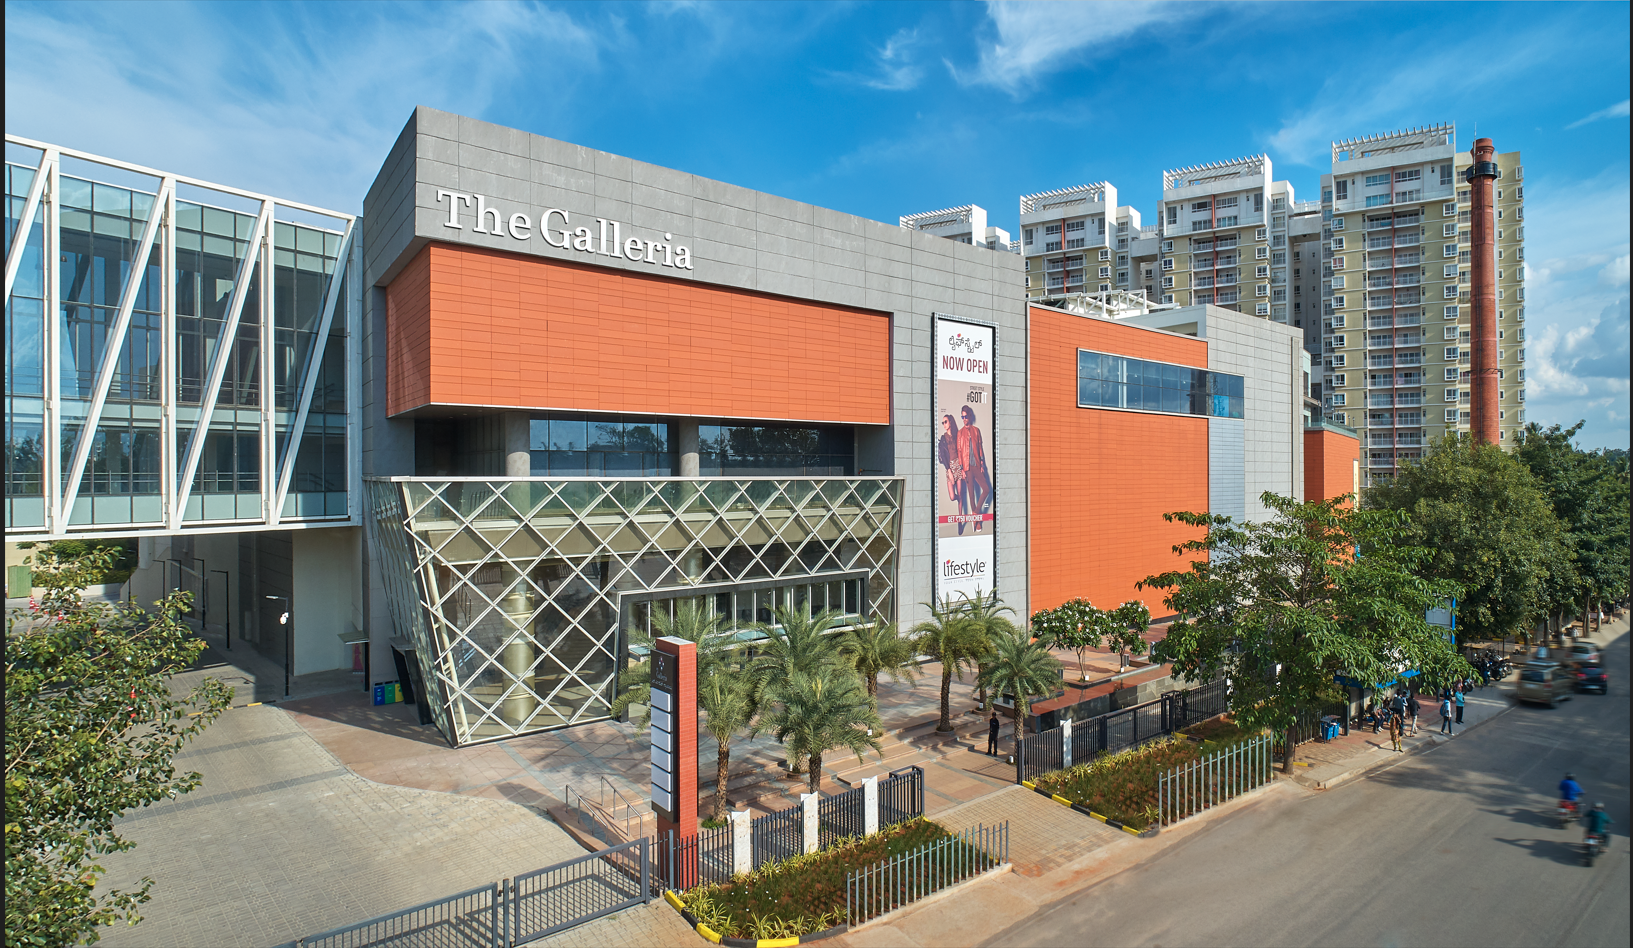 Exterior view of a mall in India during daytime